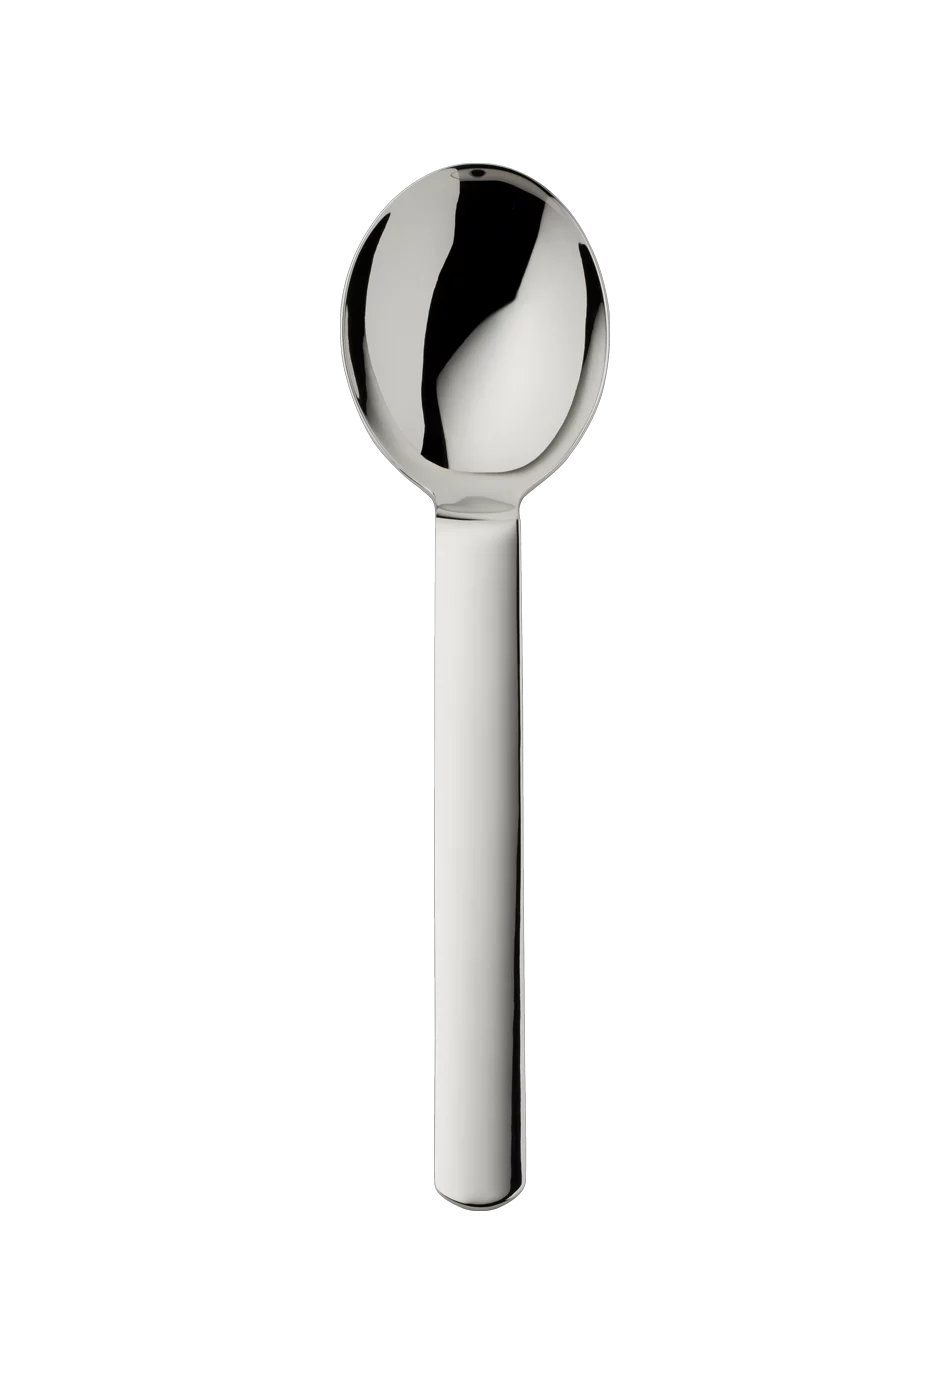 Topos Compote/Salad Serving Spoon, large (18/8 stainless steel)